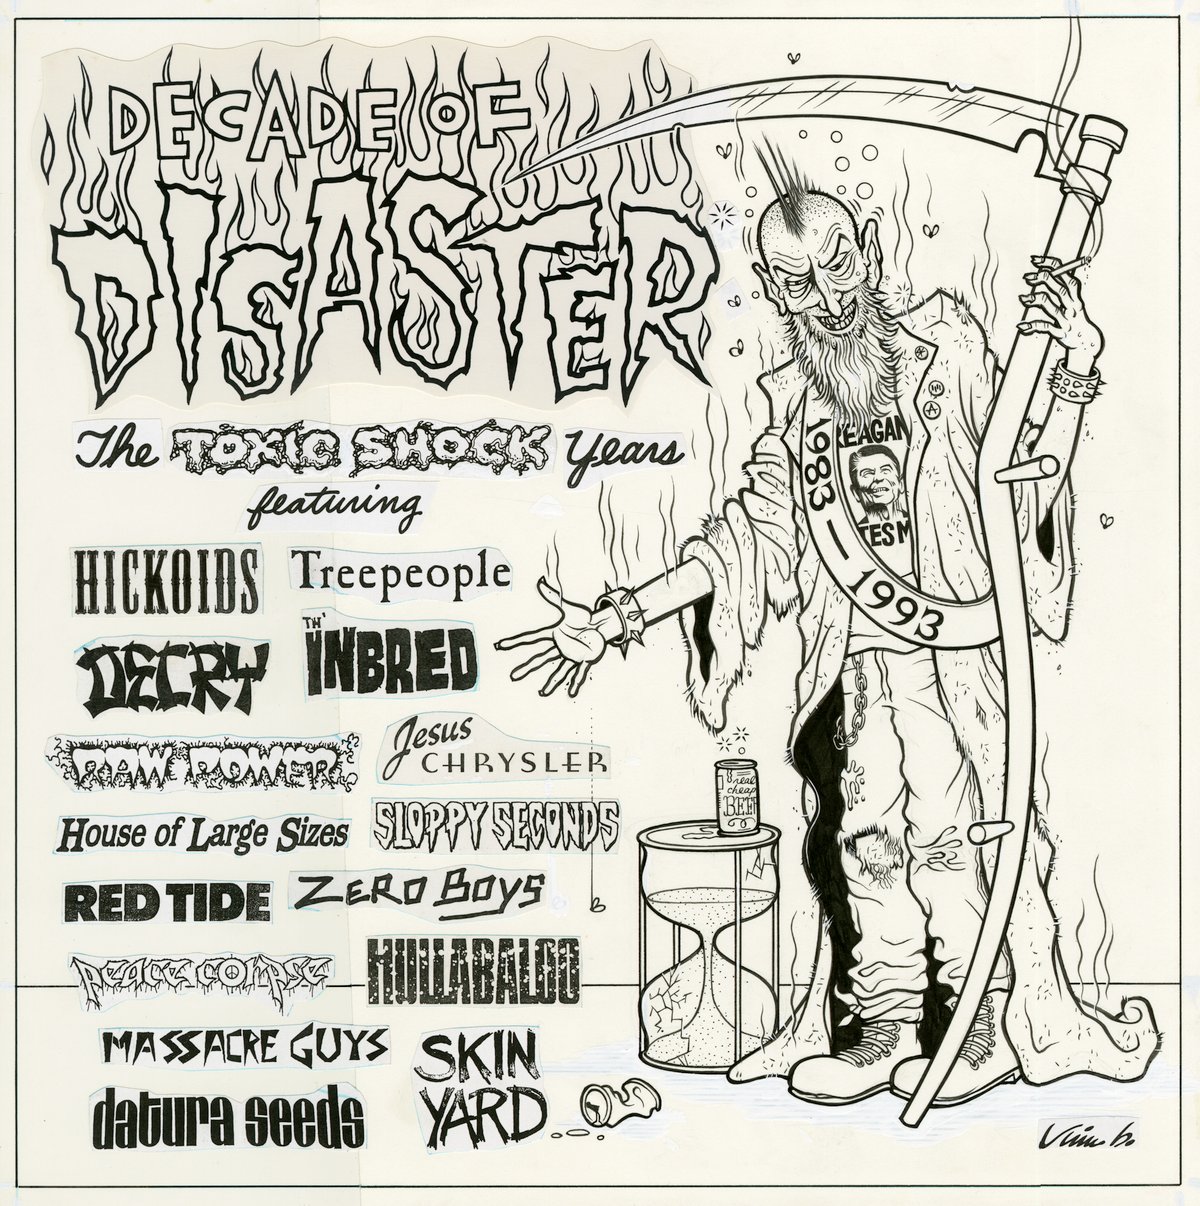 Image of DECADE OF DISASTER ink original + paste-up